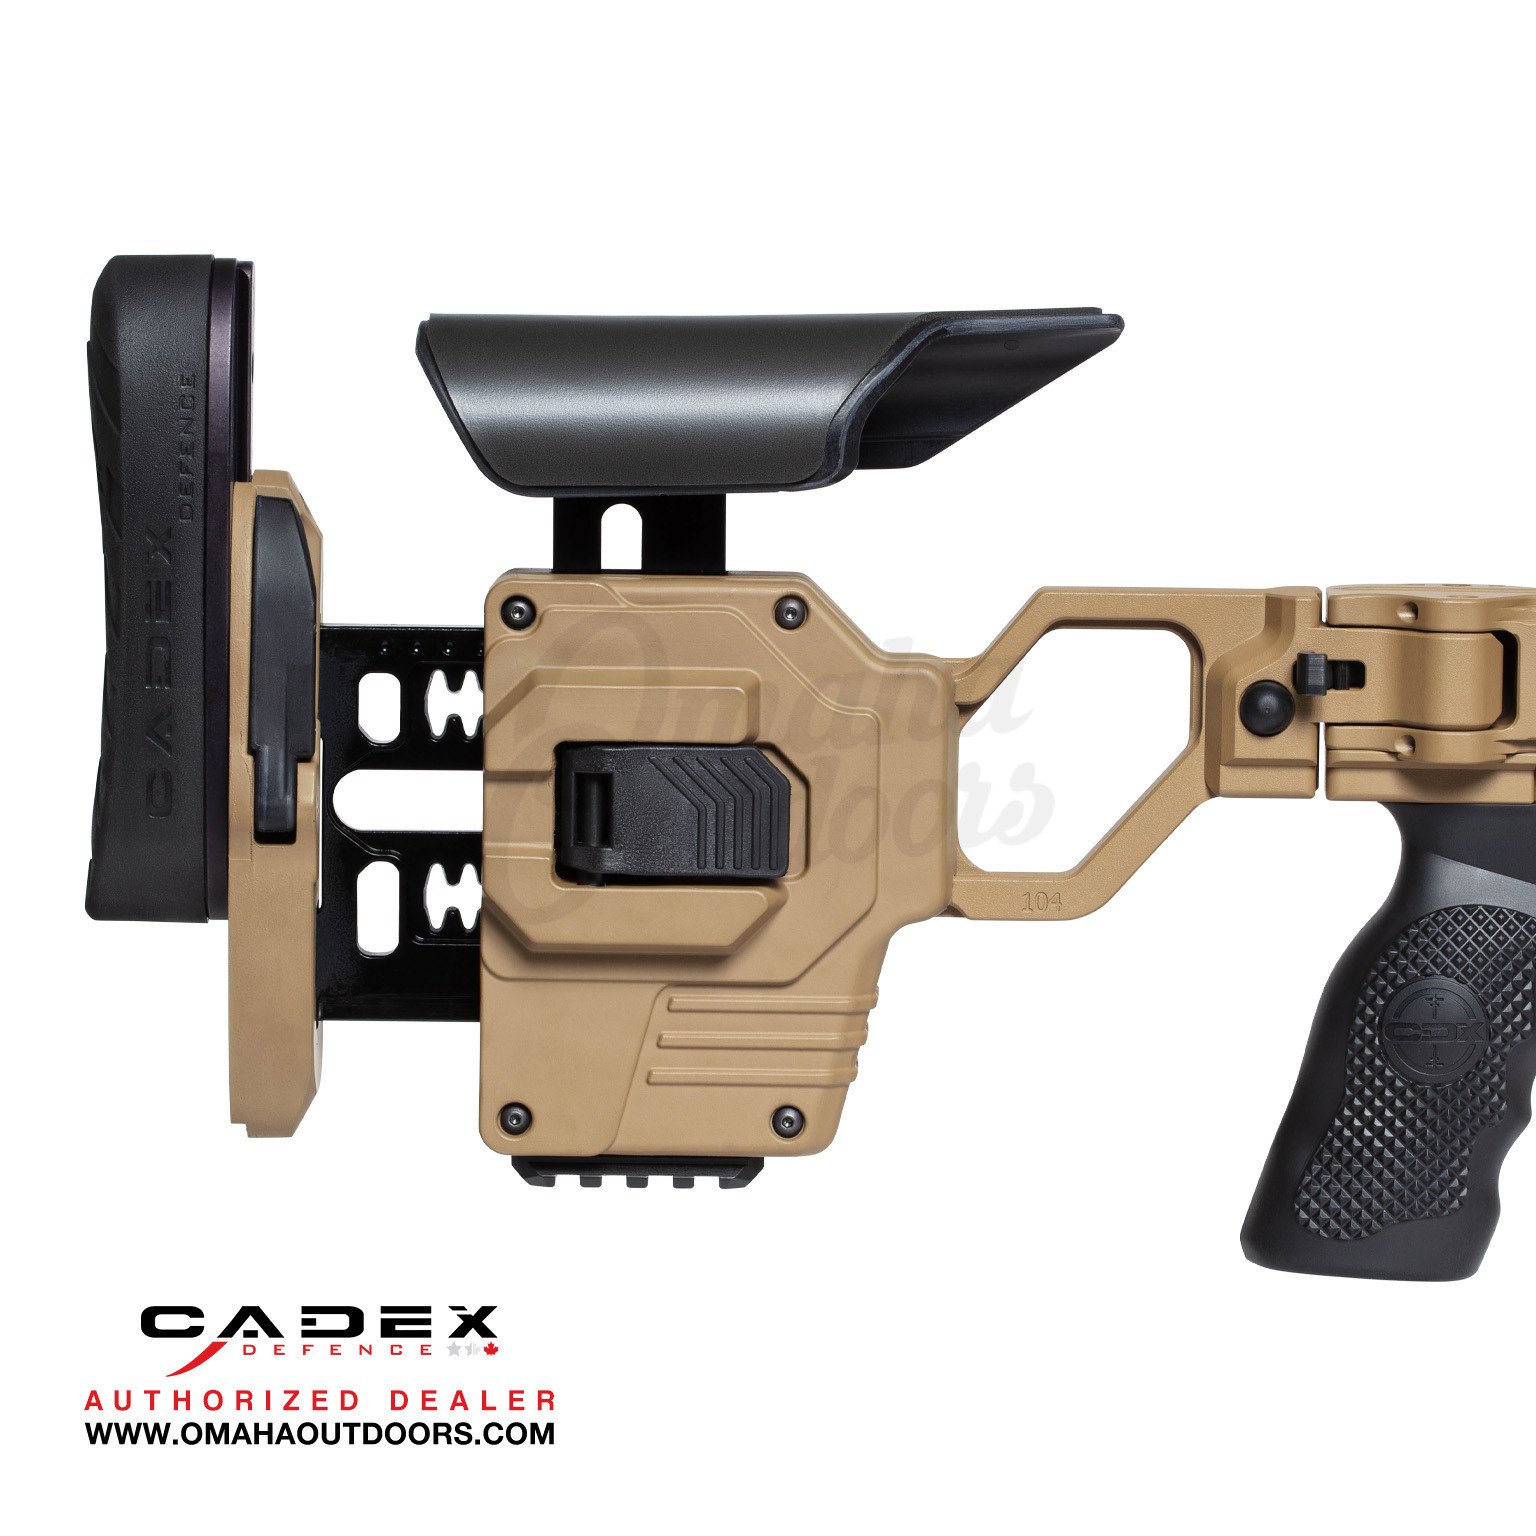 Cadex Defence - People often refer to our MX1 muzzle brake